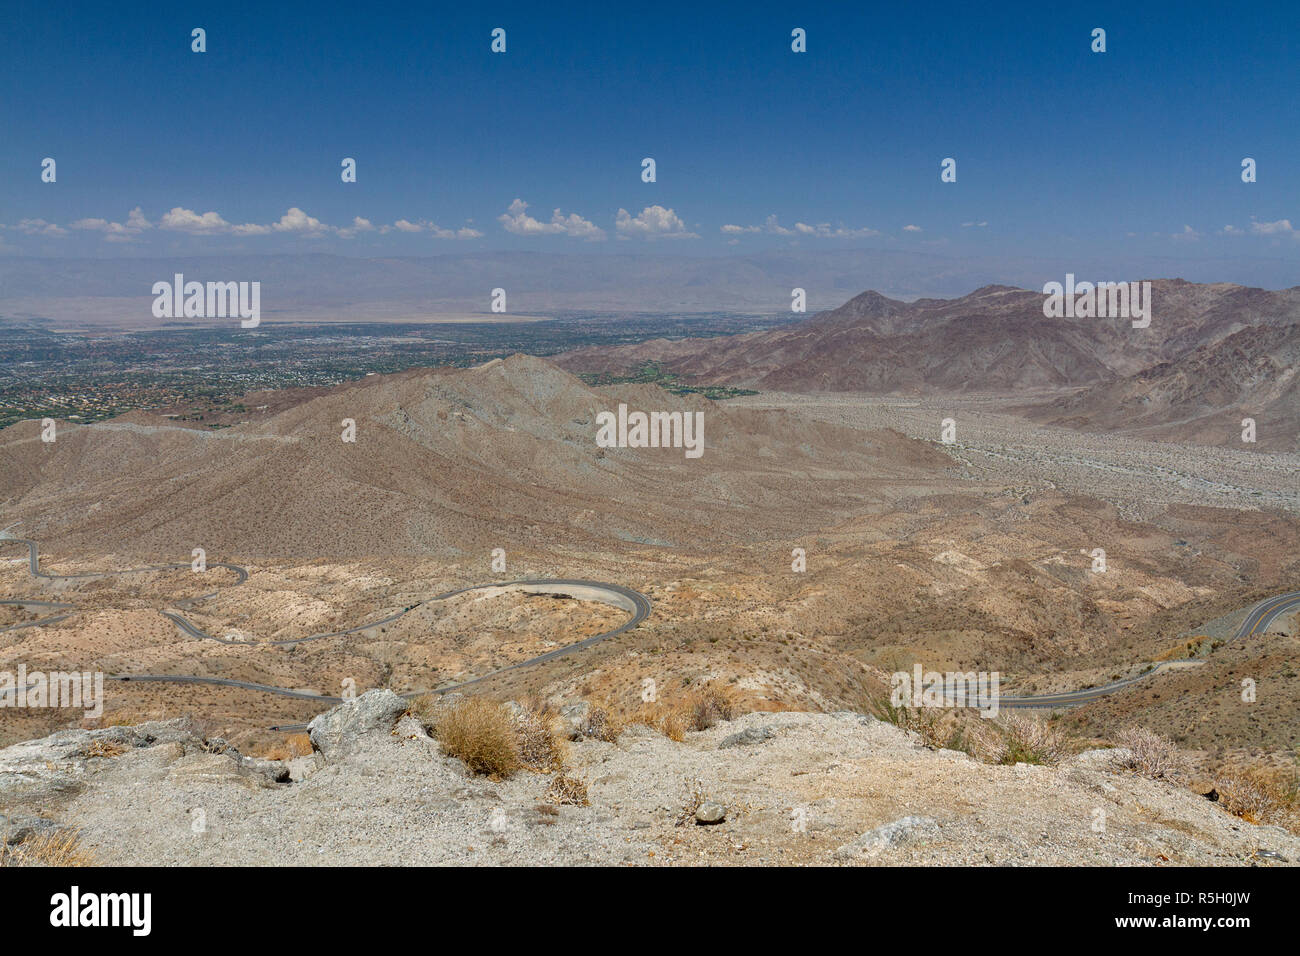 View from the Coachella valley vista point towards Palm Springs, California, United States. Stock Photo